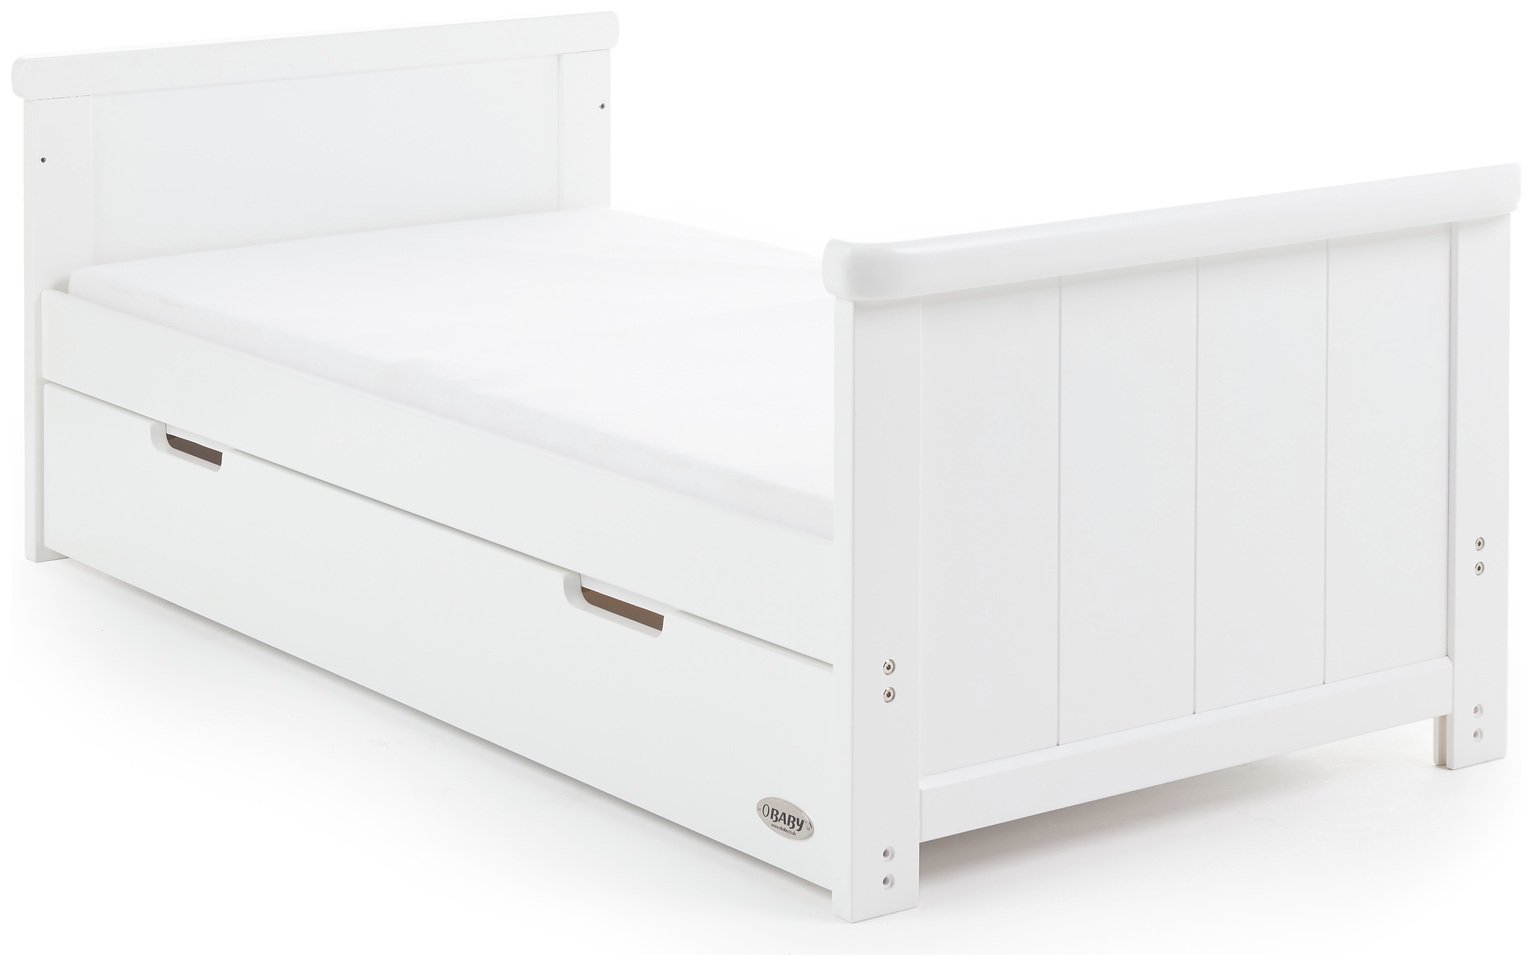 Obaby Belton Cot Bed Review